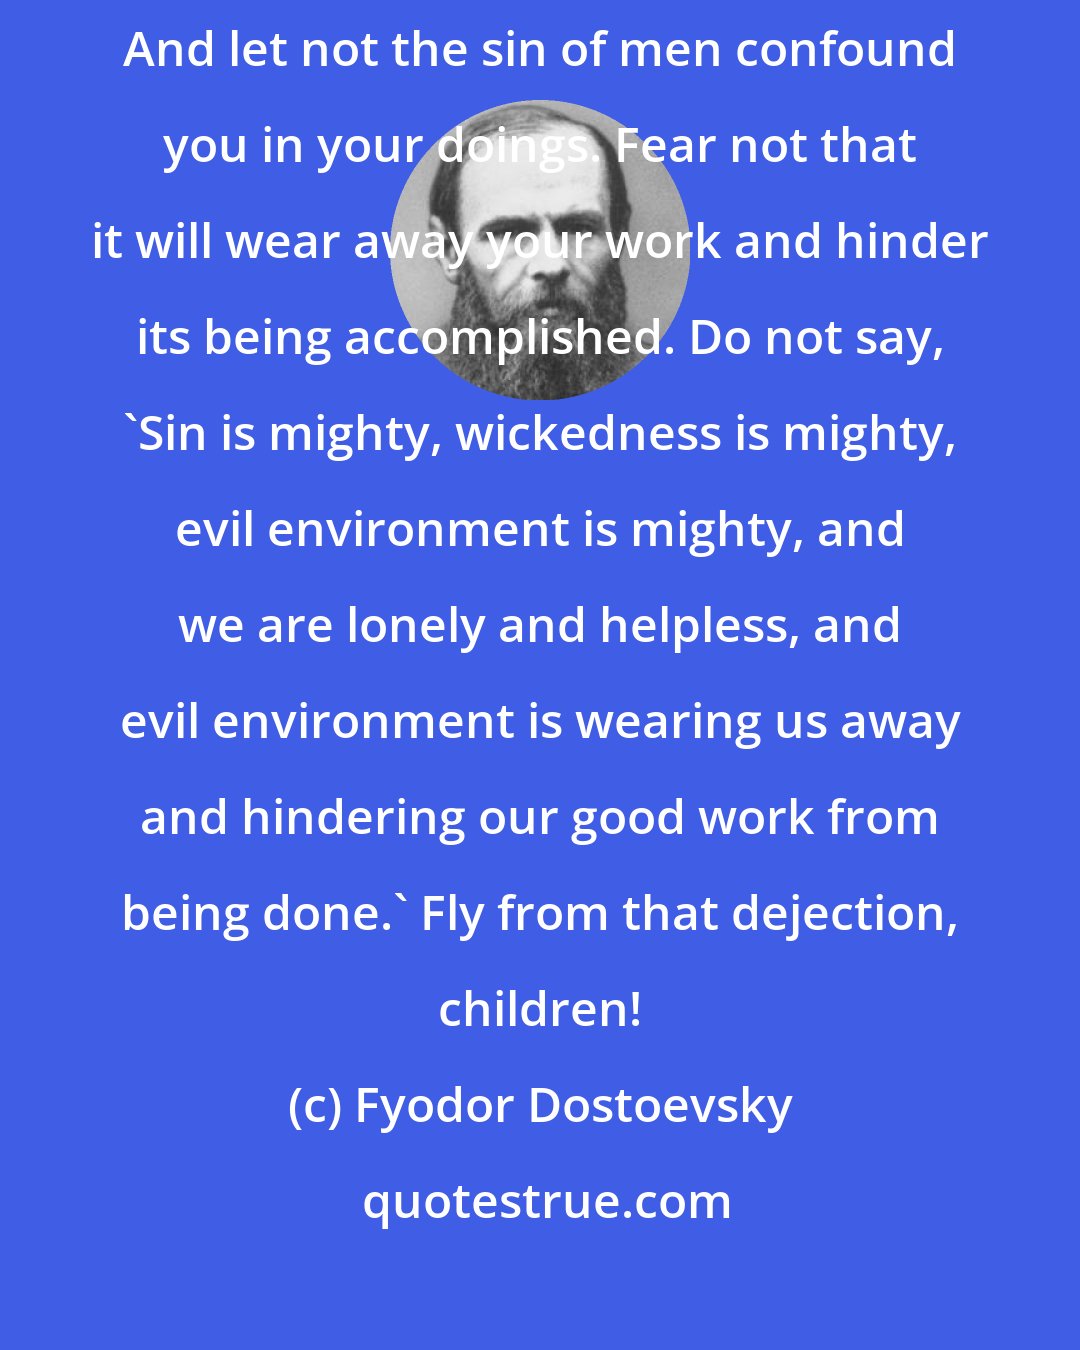 Fyodor Dostoevsky: Pray to God for gladness. Be glad as children, as the birds of heaven. And let not the sin of men confound you in your doings. Fear not that it will wear away your work and hinder its being accomplished. Do not say, 'Sin is mighty, wickedness is mighty, evil environment is mighty, and we are lonely and helpless, and evil environment is wearing us away and hindering our good work from being done.' Fly from that dejection, children!